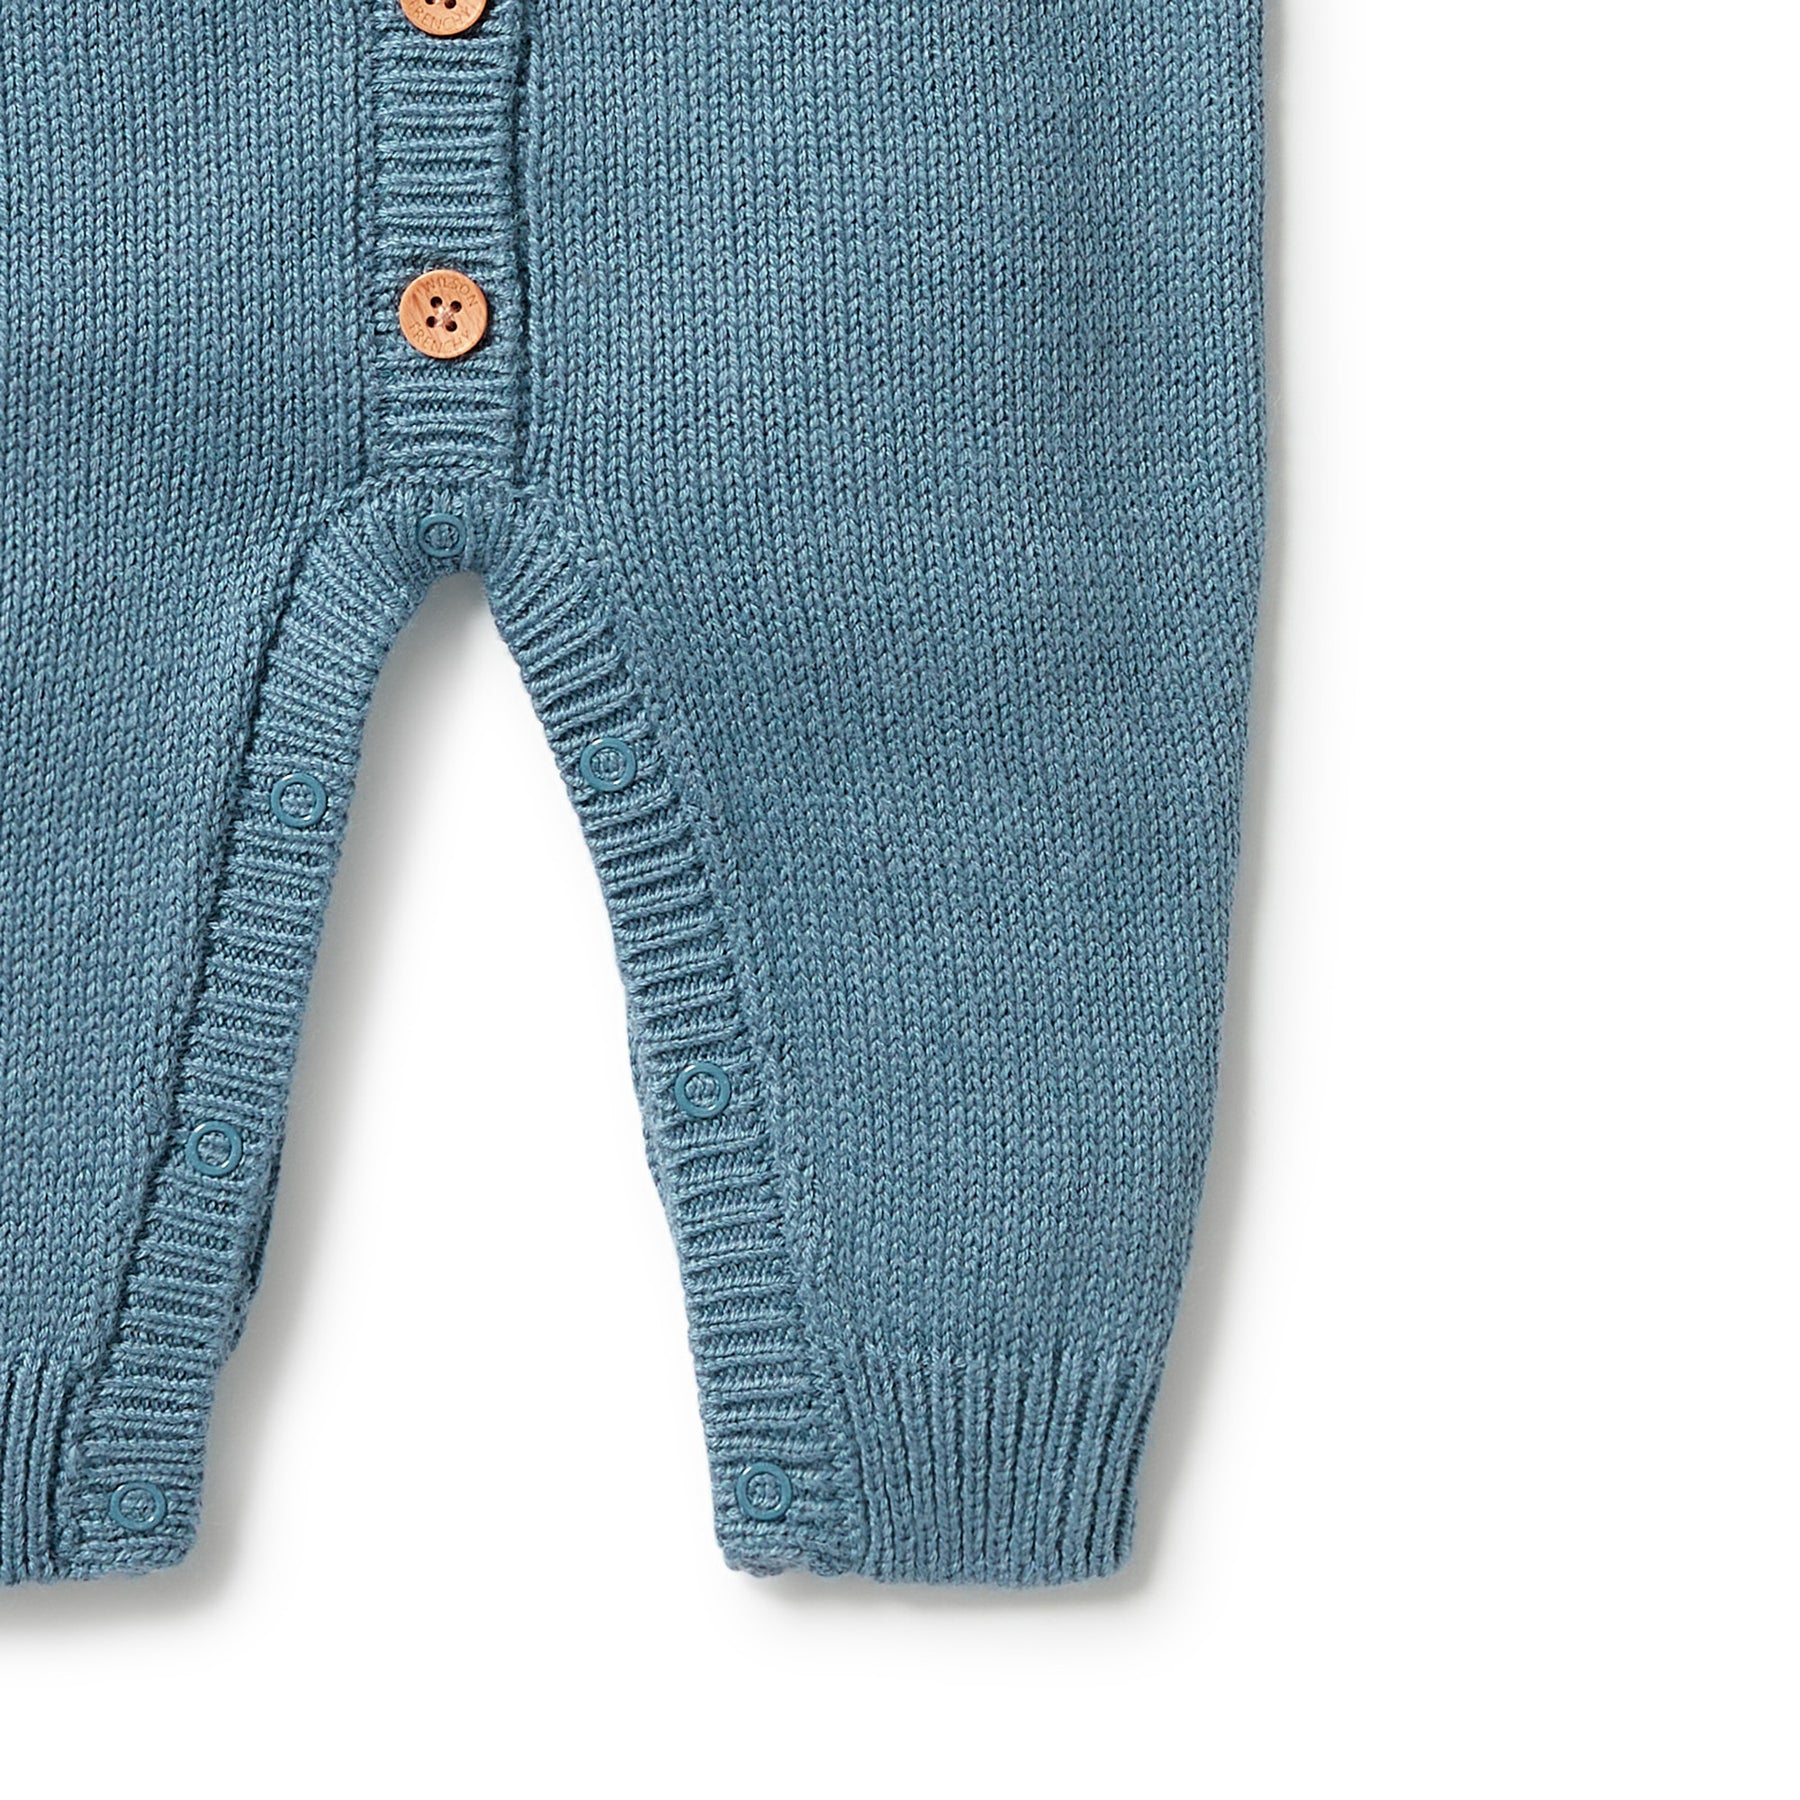 WILSON + FRENCHY | Knitted Button Growsuit Bluestone